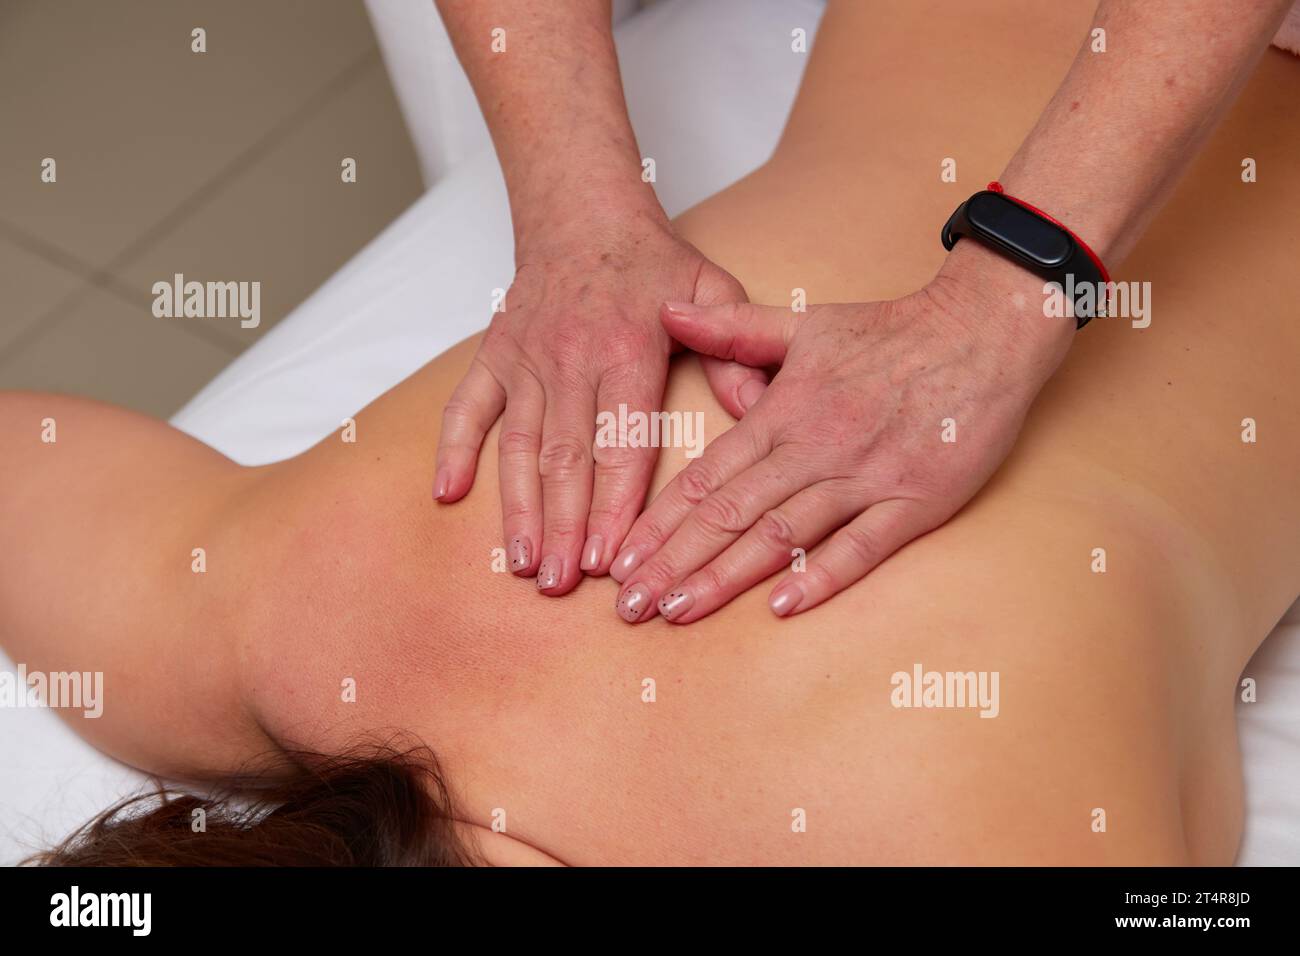 Closeup of skilled masseuse hands giving back pain relief massage to young woman client in medical office Stock Photo